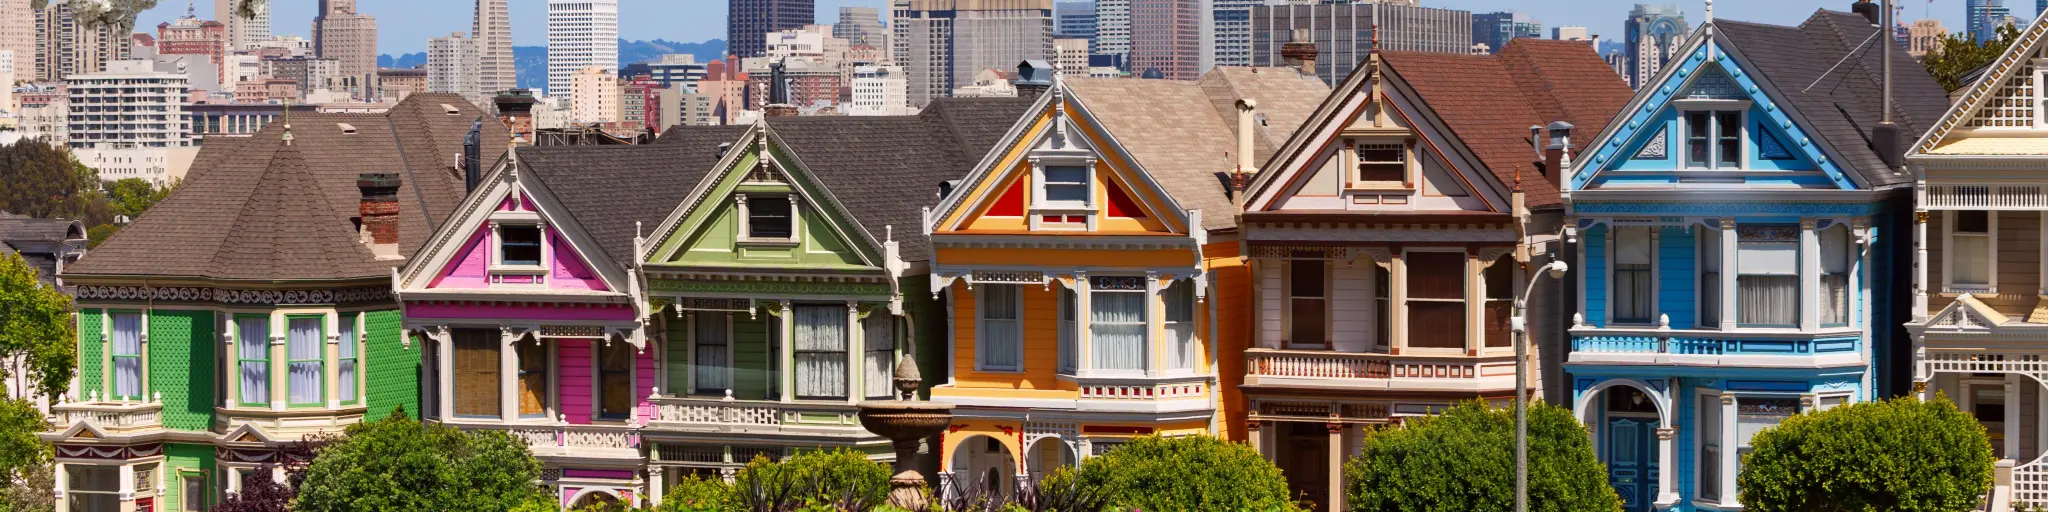 Painted Ladies, a group of famous colorful houses, on a spring day with blossoming trees in the foreground